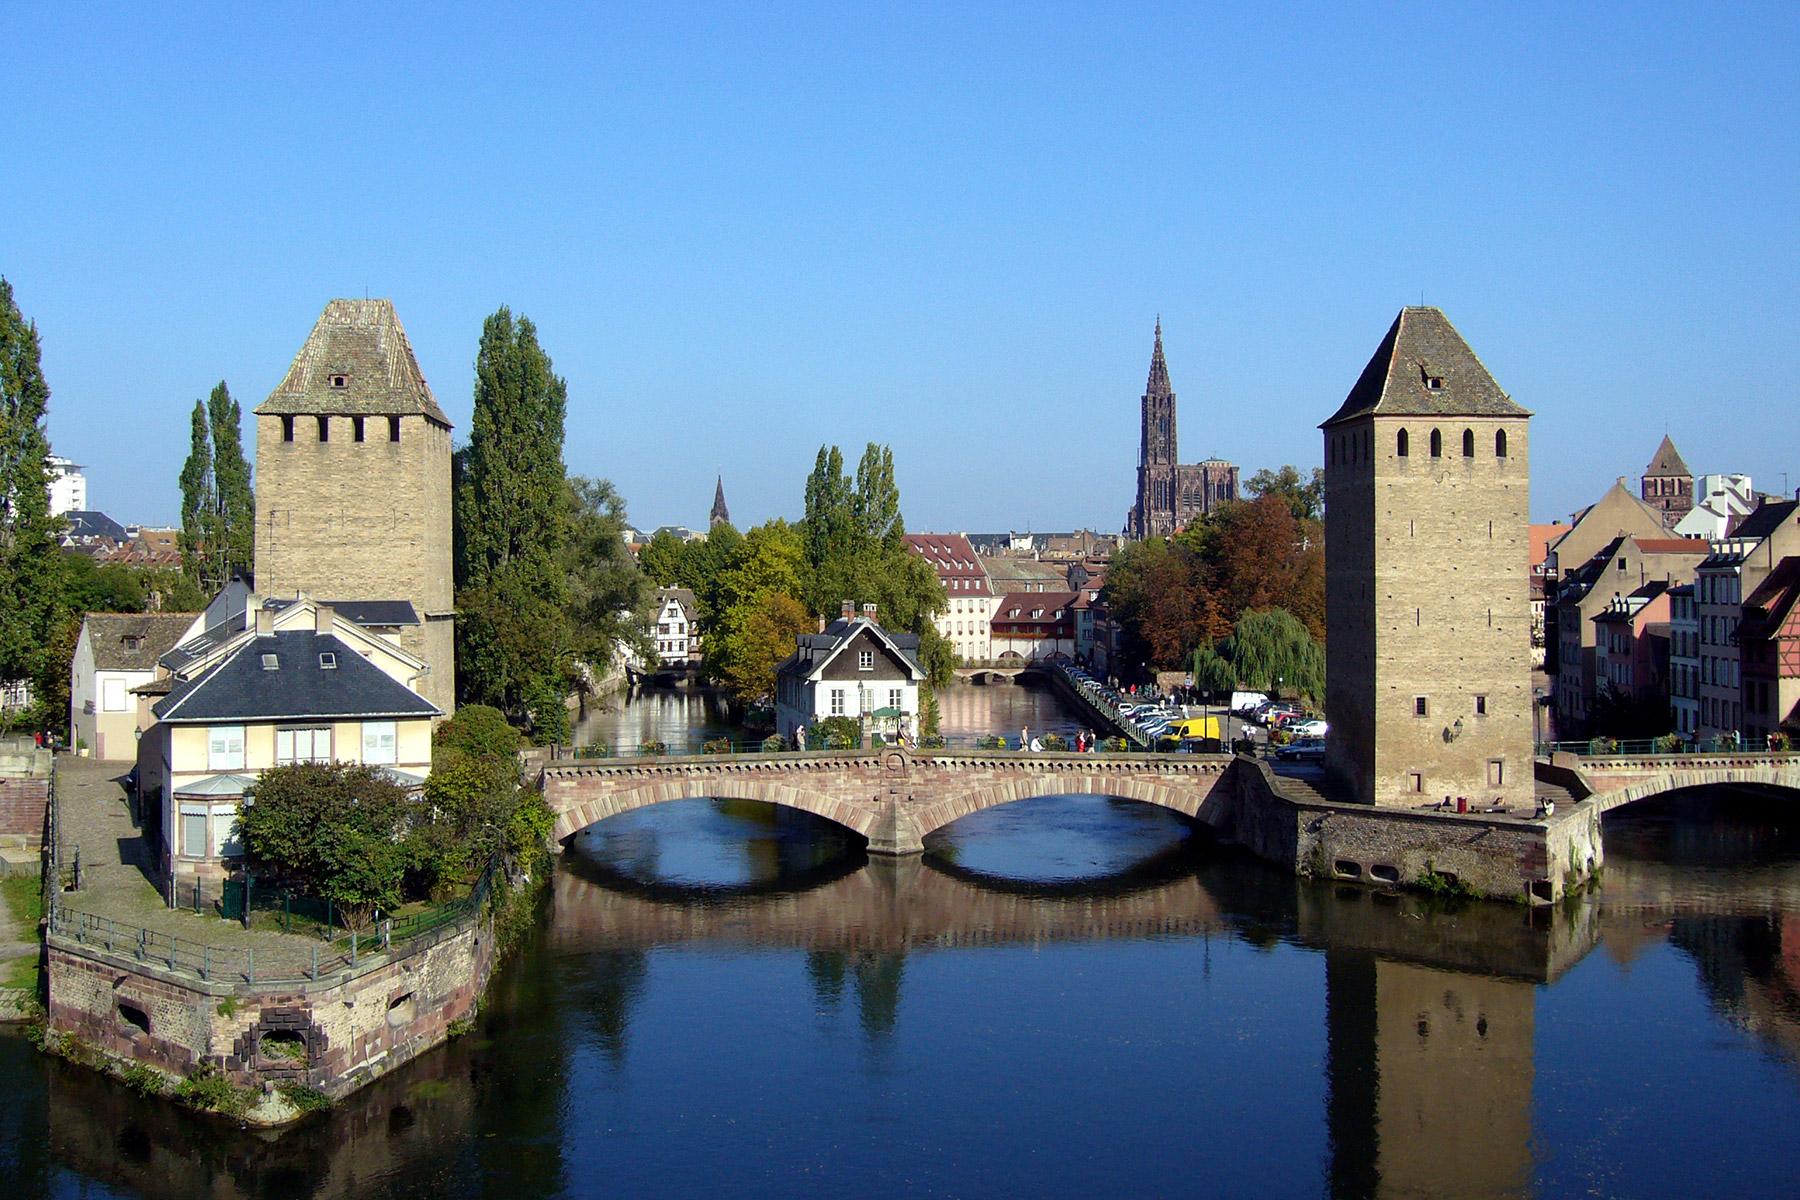 The old city and cathedral of Strasbourg in eastern France where the Institute for Ecumenical Research is located. Photo: Jonathan Martz for Creative Commons